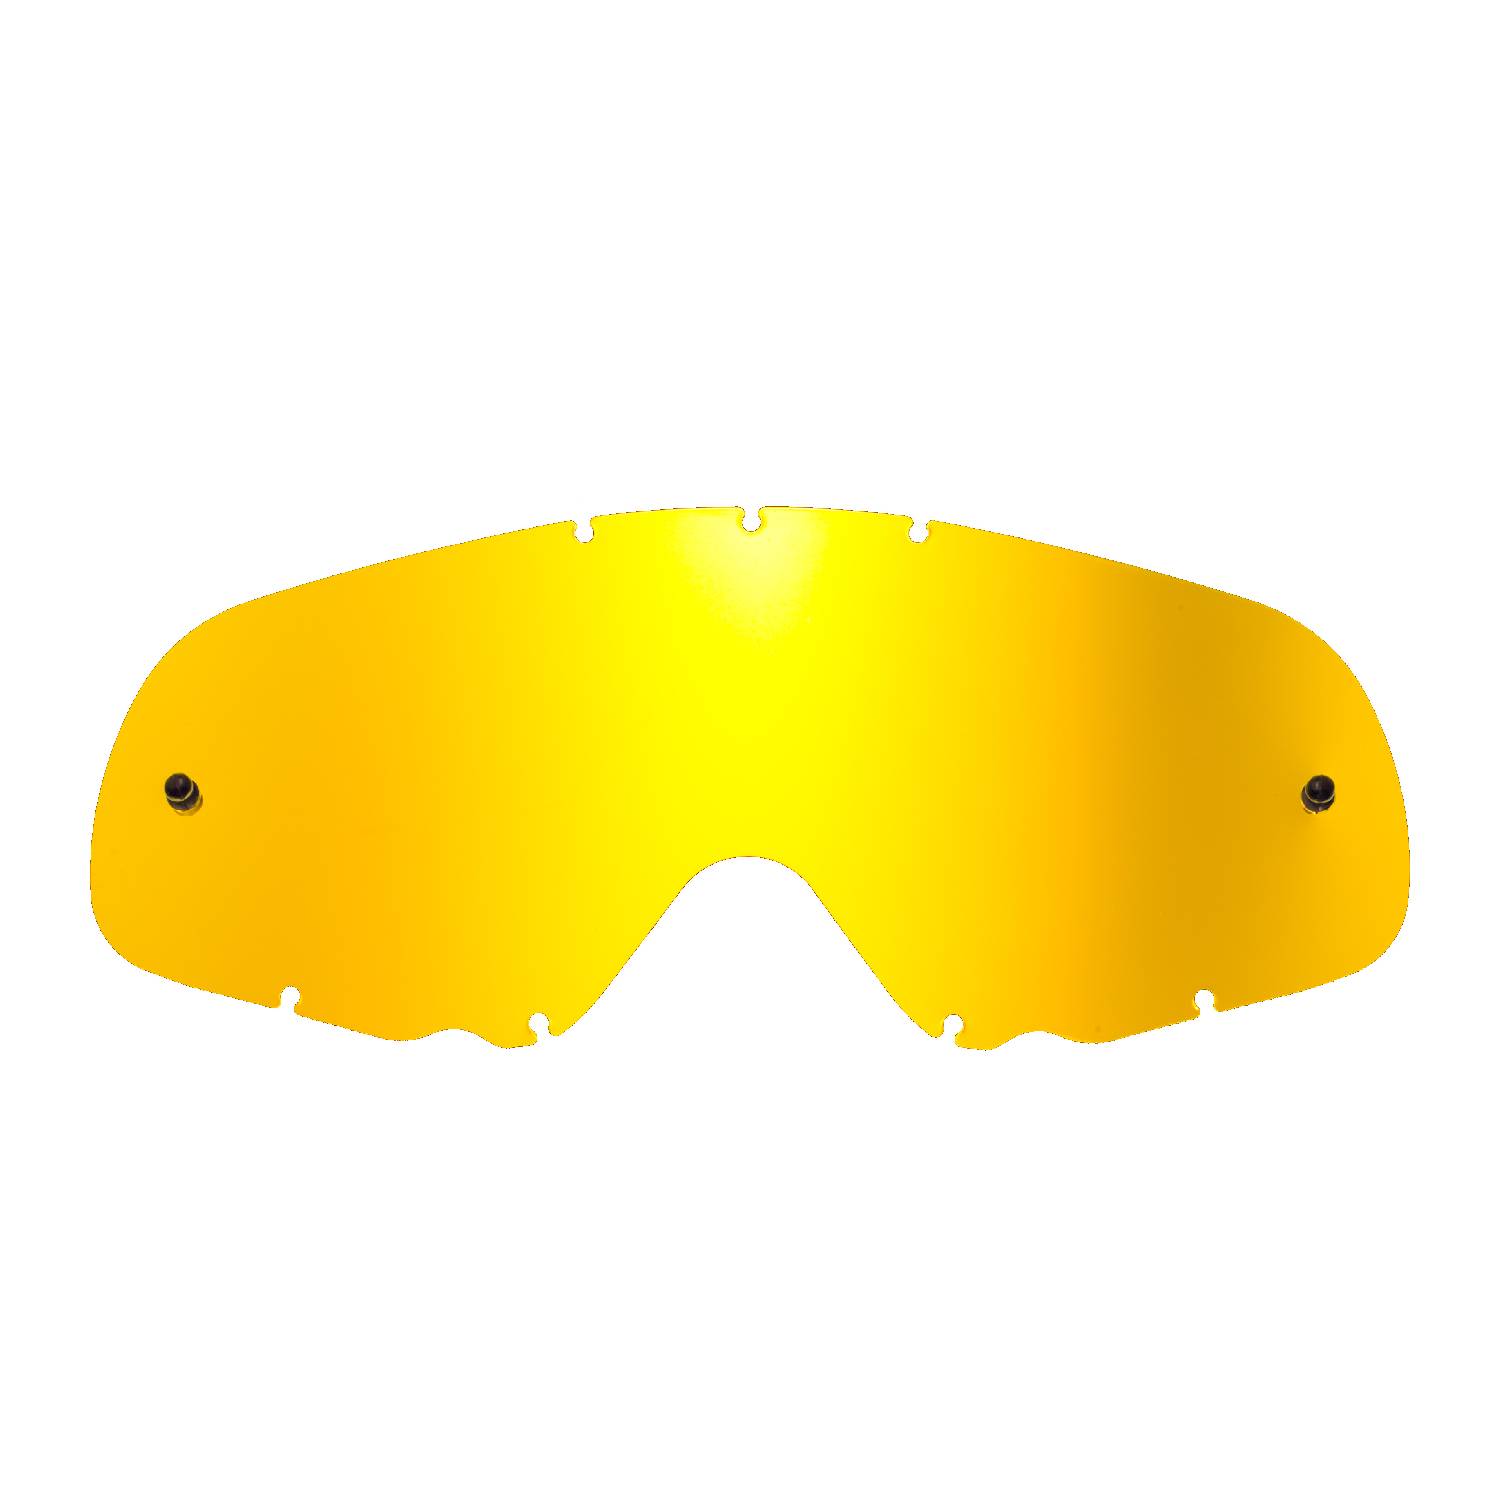 gold-toned mirrored replacement lenses compatible for Oakley Crowbar goggle